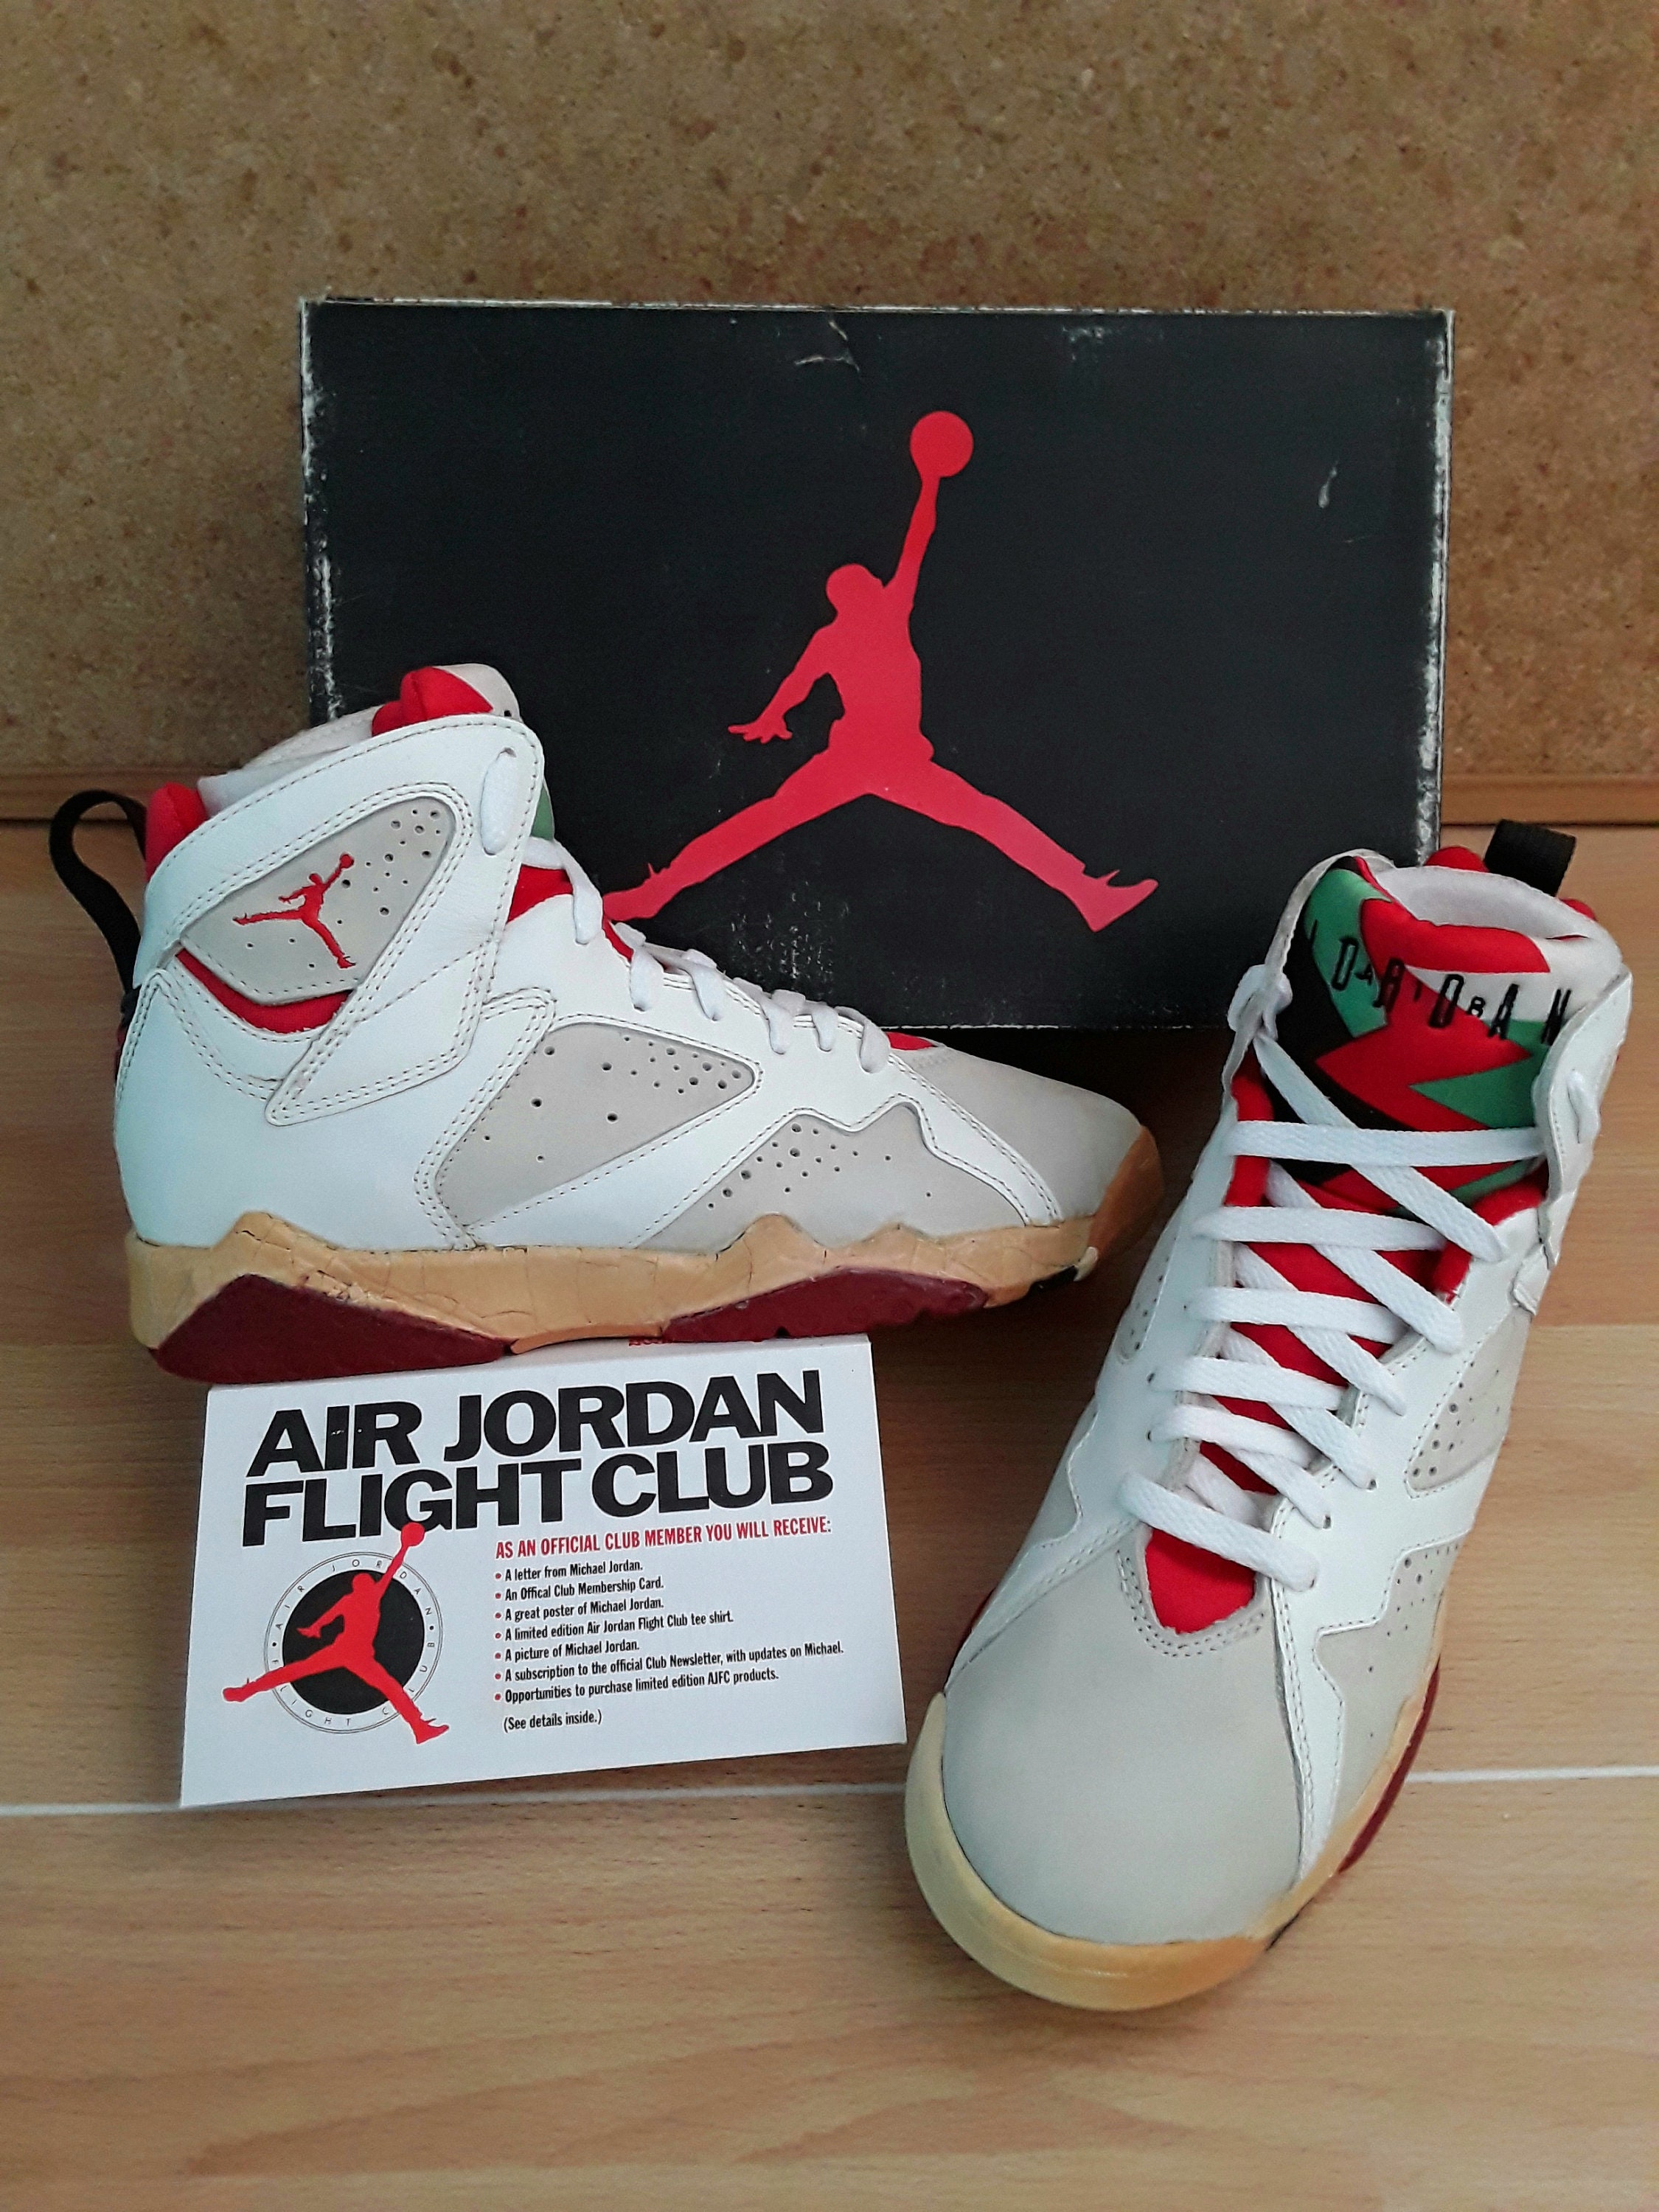 mareridt Ælte lyd Nike AIR JORDAN 7 Authentic New Never Worn in Original Box and - Etsy